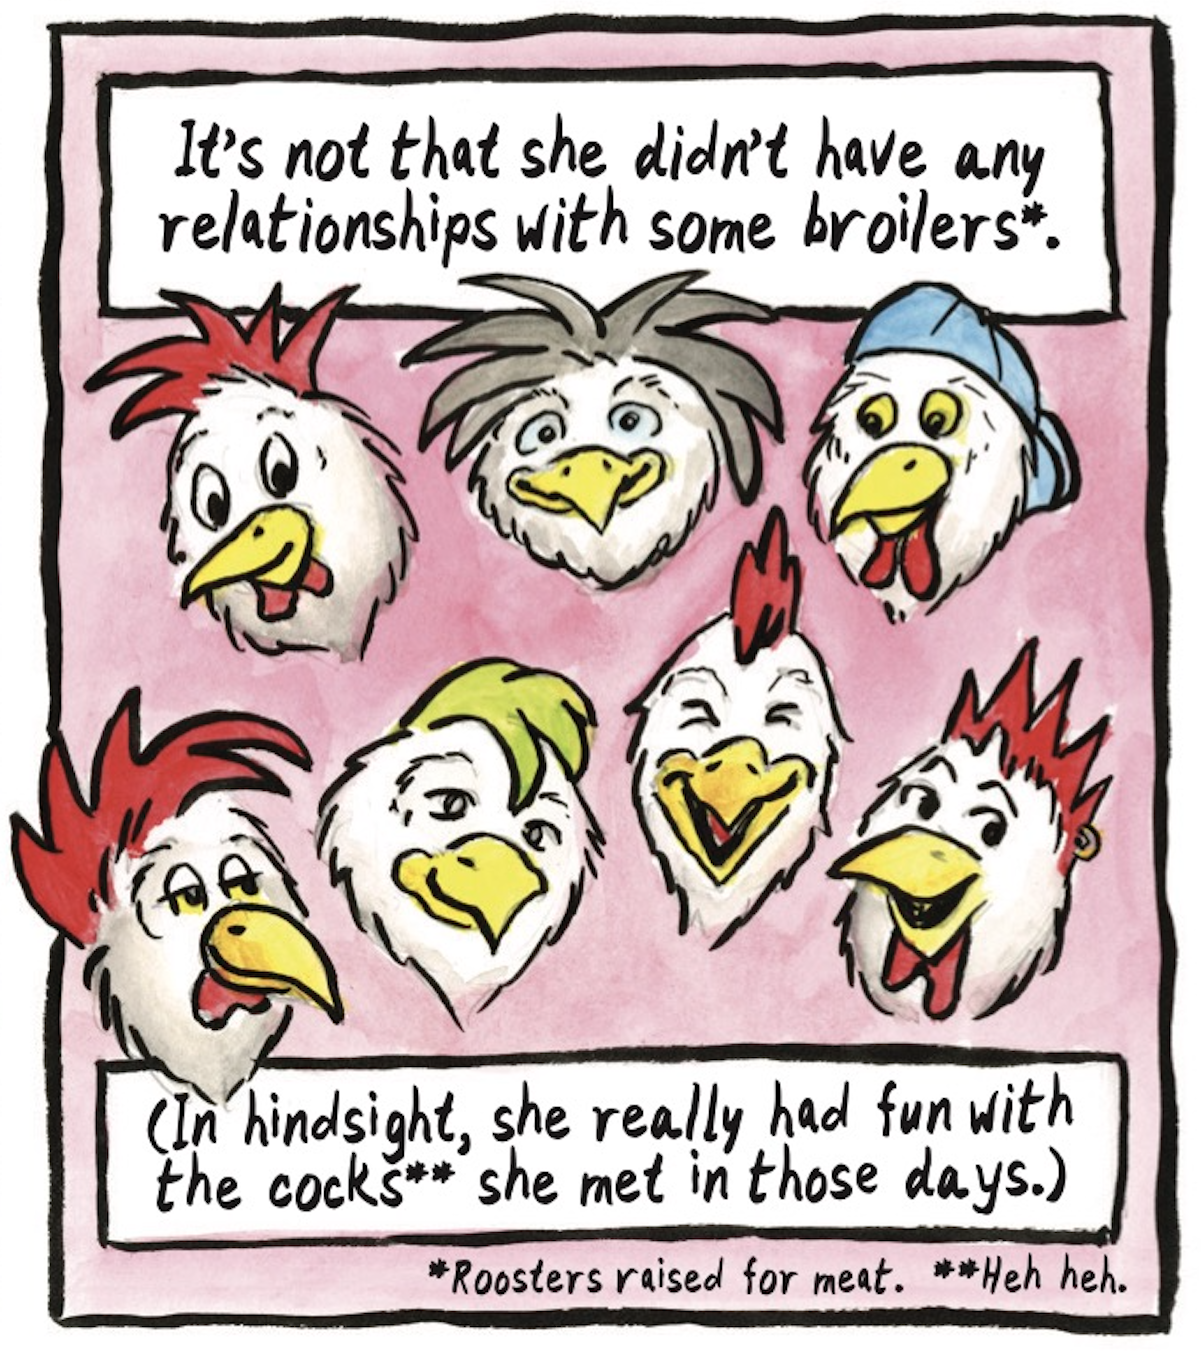 â€œItâ€™s not that she didnâ€™t have any relationships with some broilers* (*Roosters raised for meat.) (In hindsight, she really had fun with the cocks** (**Heh heh) she met in those days.â€ The heads of various roosters with different feather-styles and personalities smile.